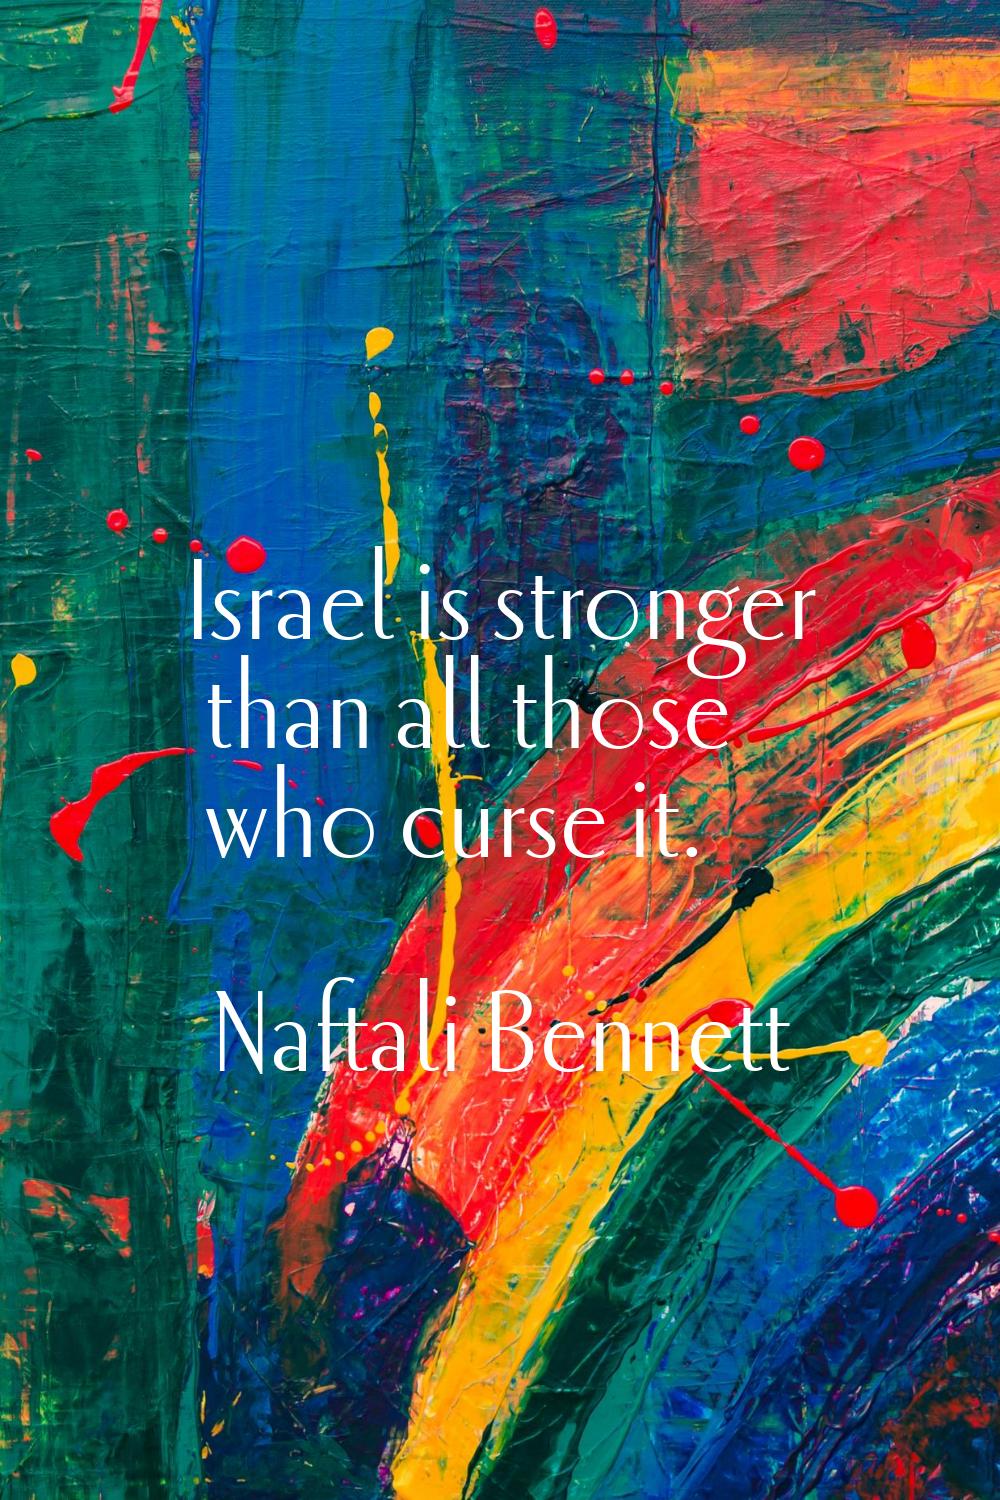 Israel is stronger than all those who curse it.